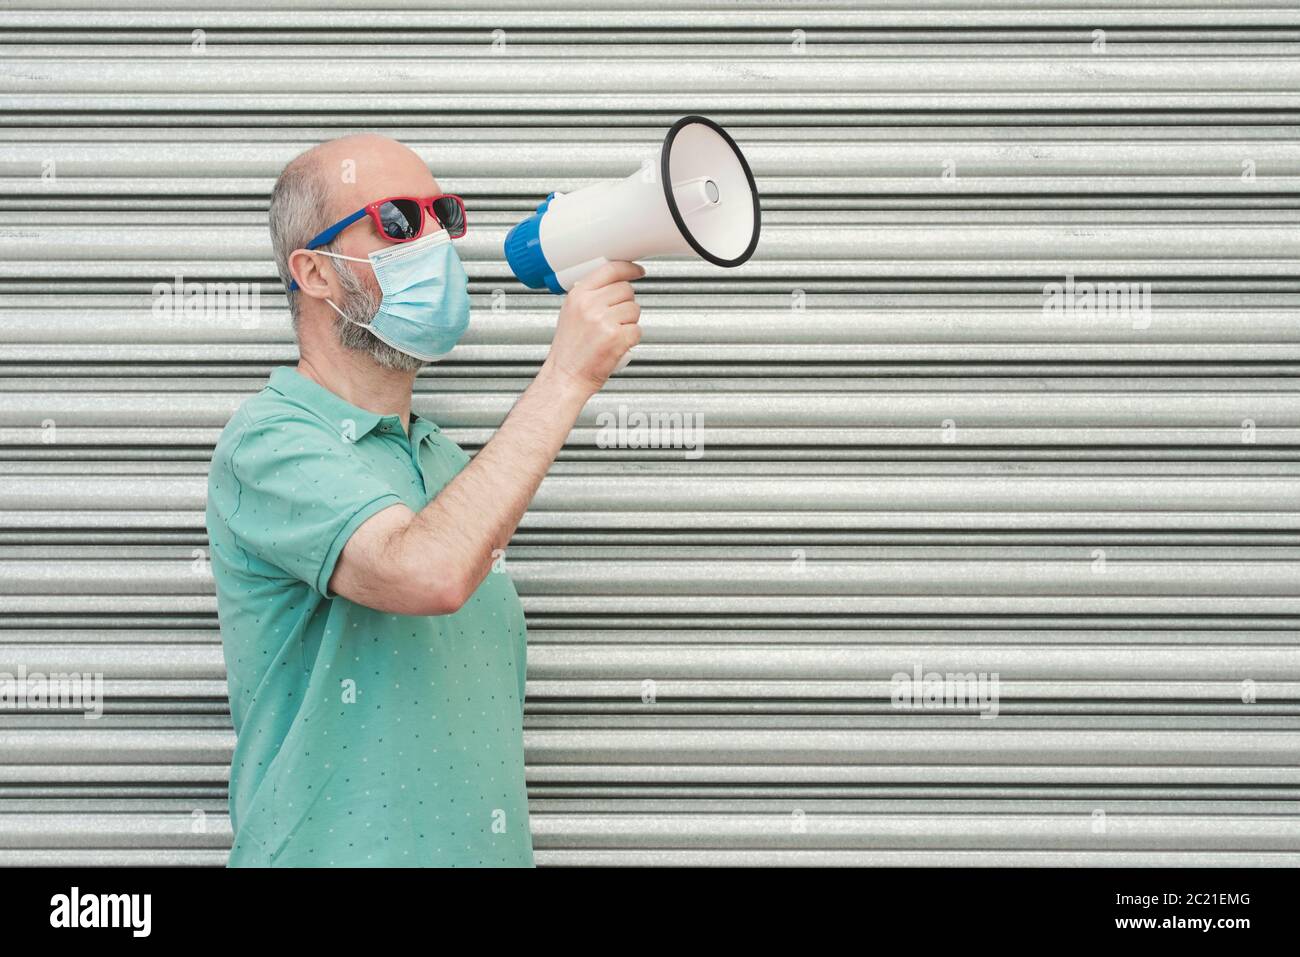 man with medical mask screaming with megaphone outdoor Stock Photo